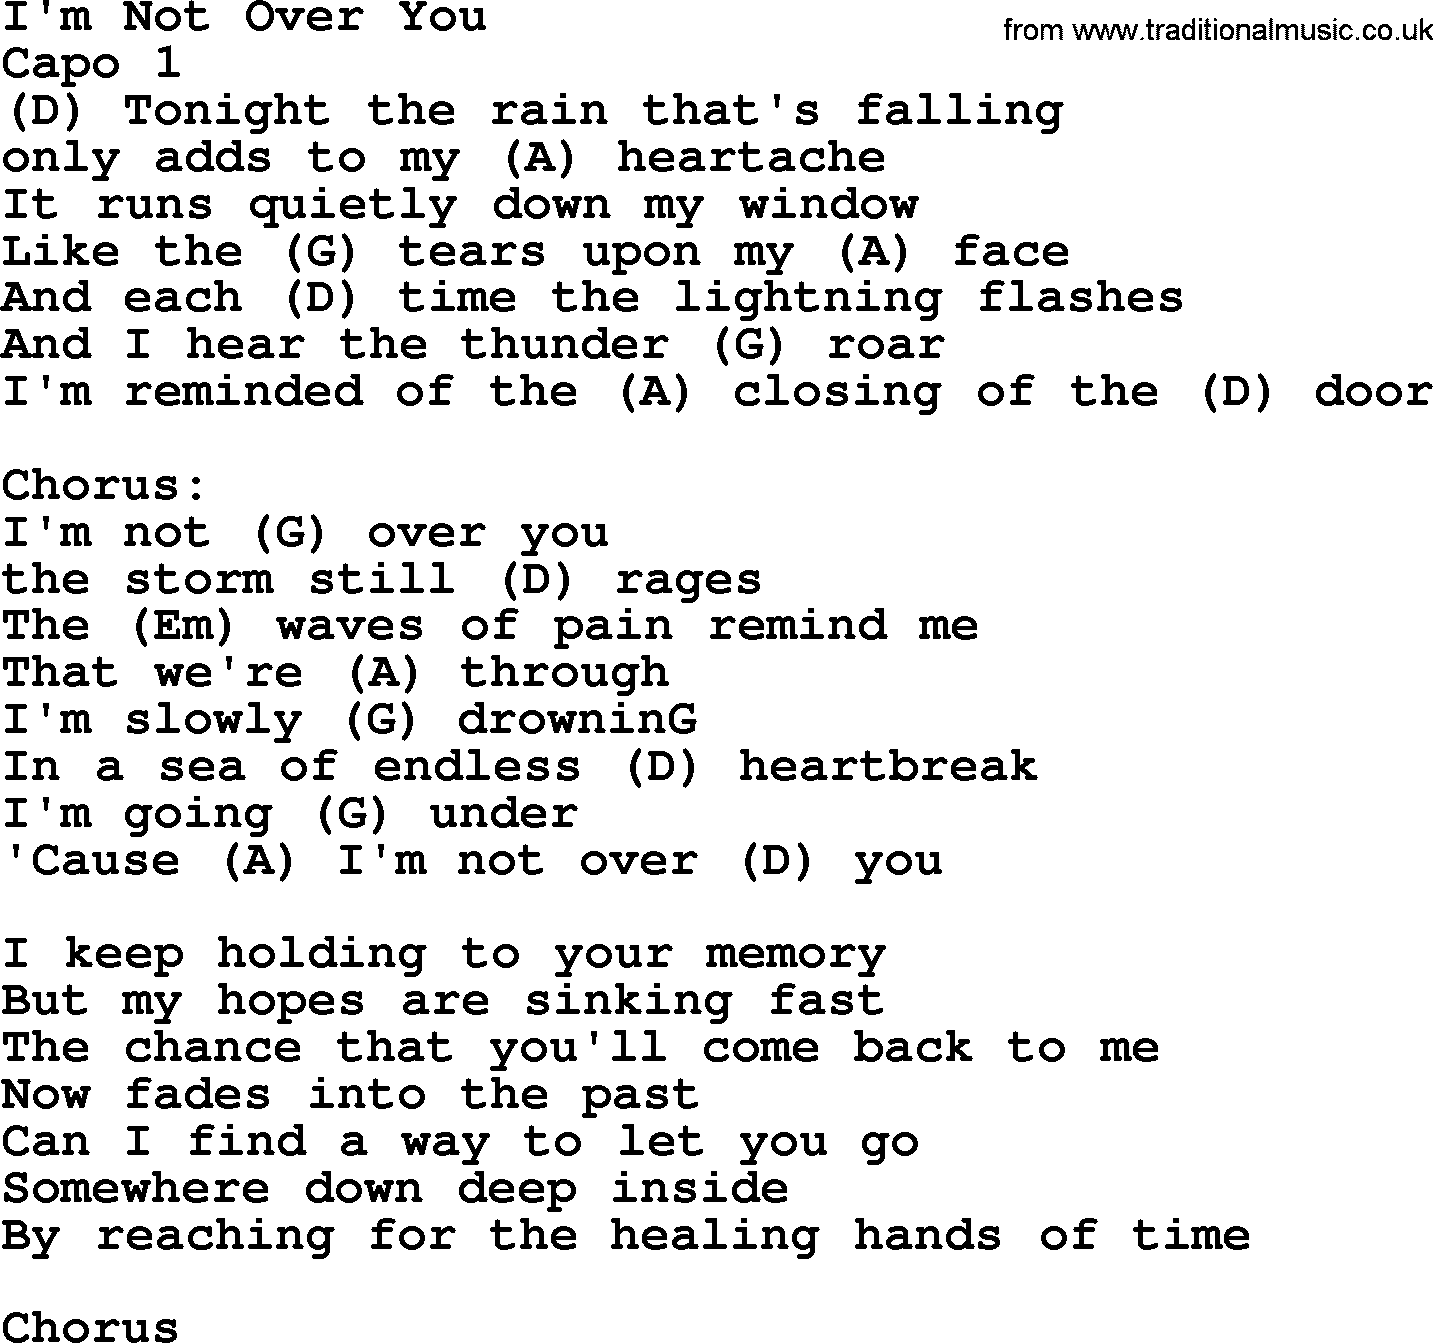 Bluegrass song: I'm Not Over You, lyrics and chords